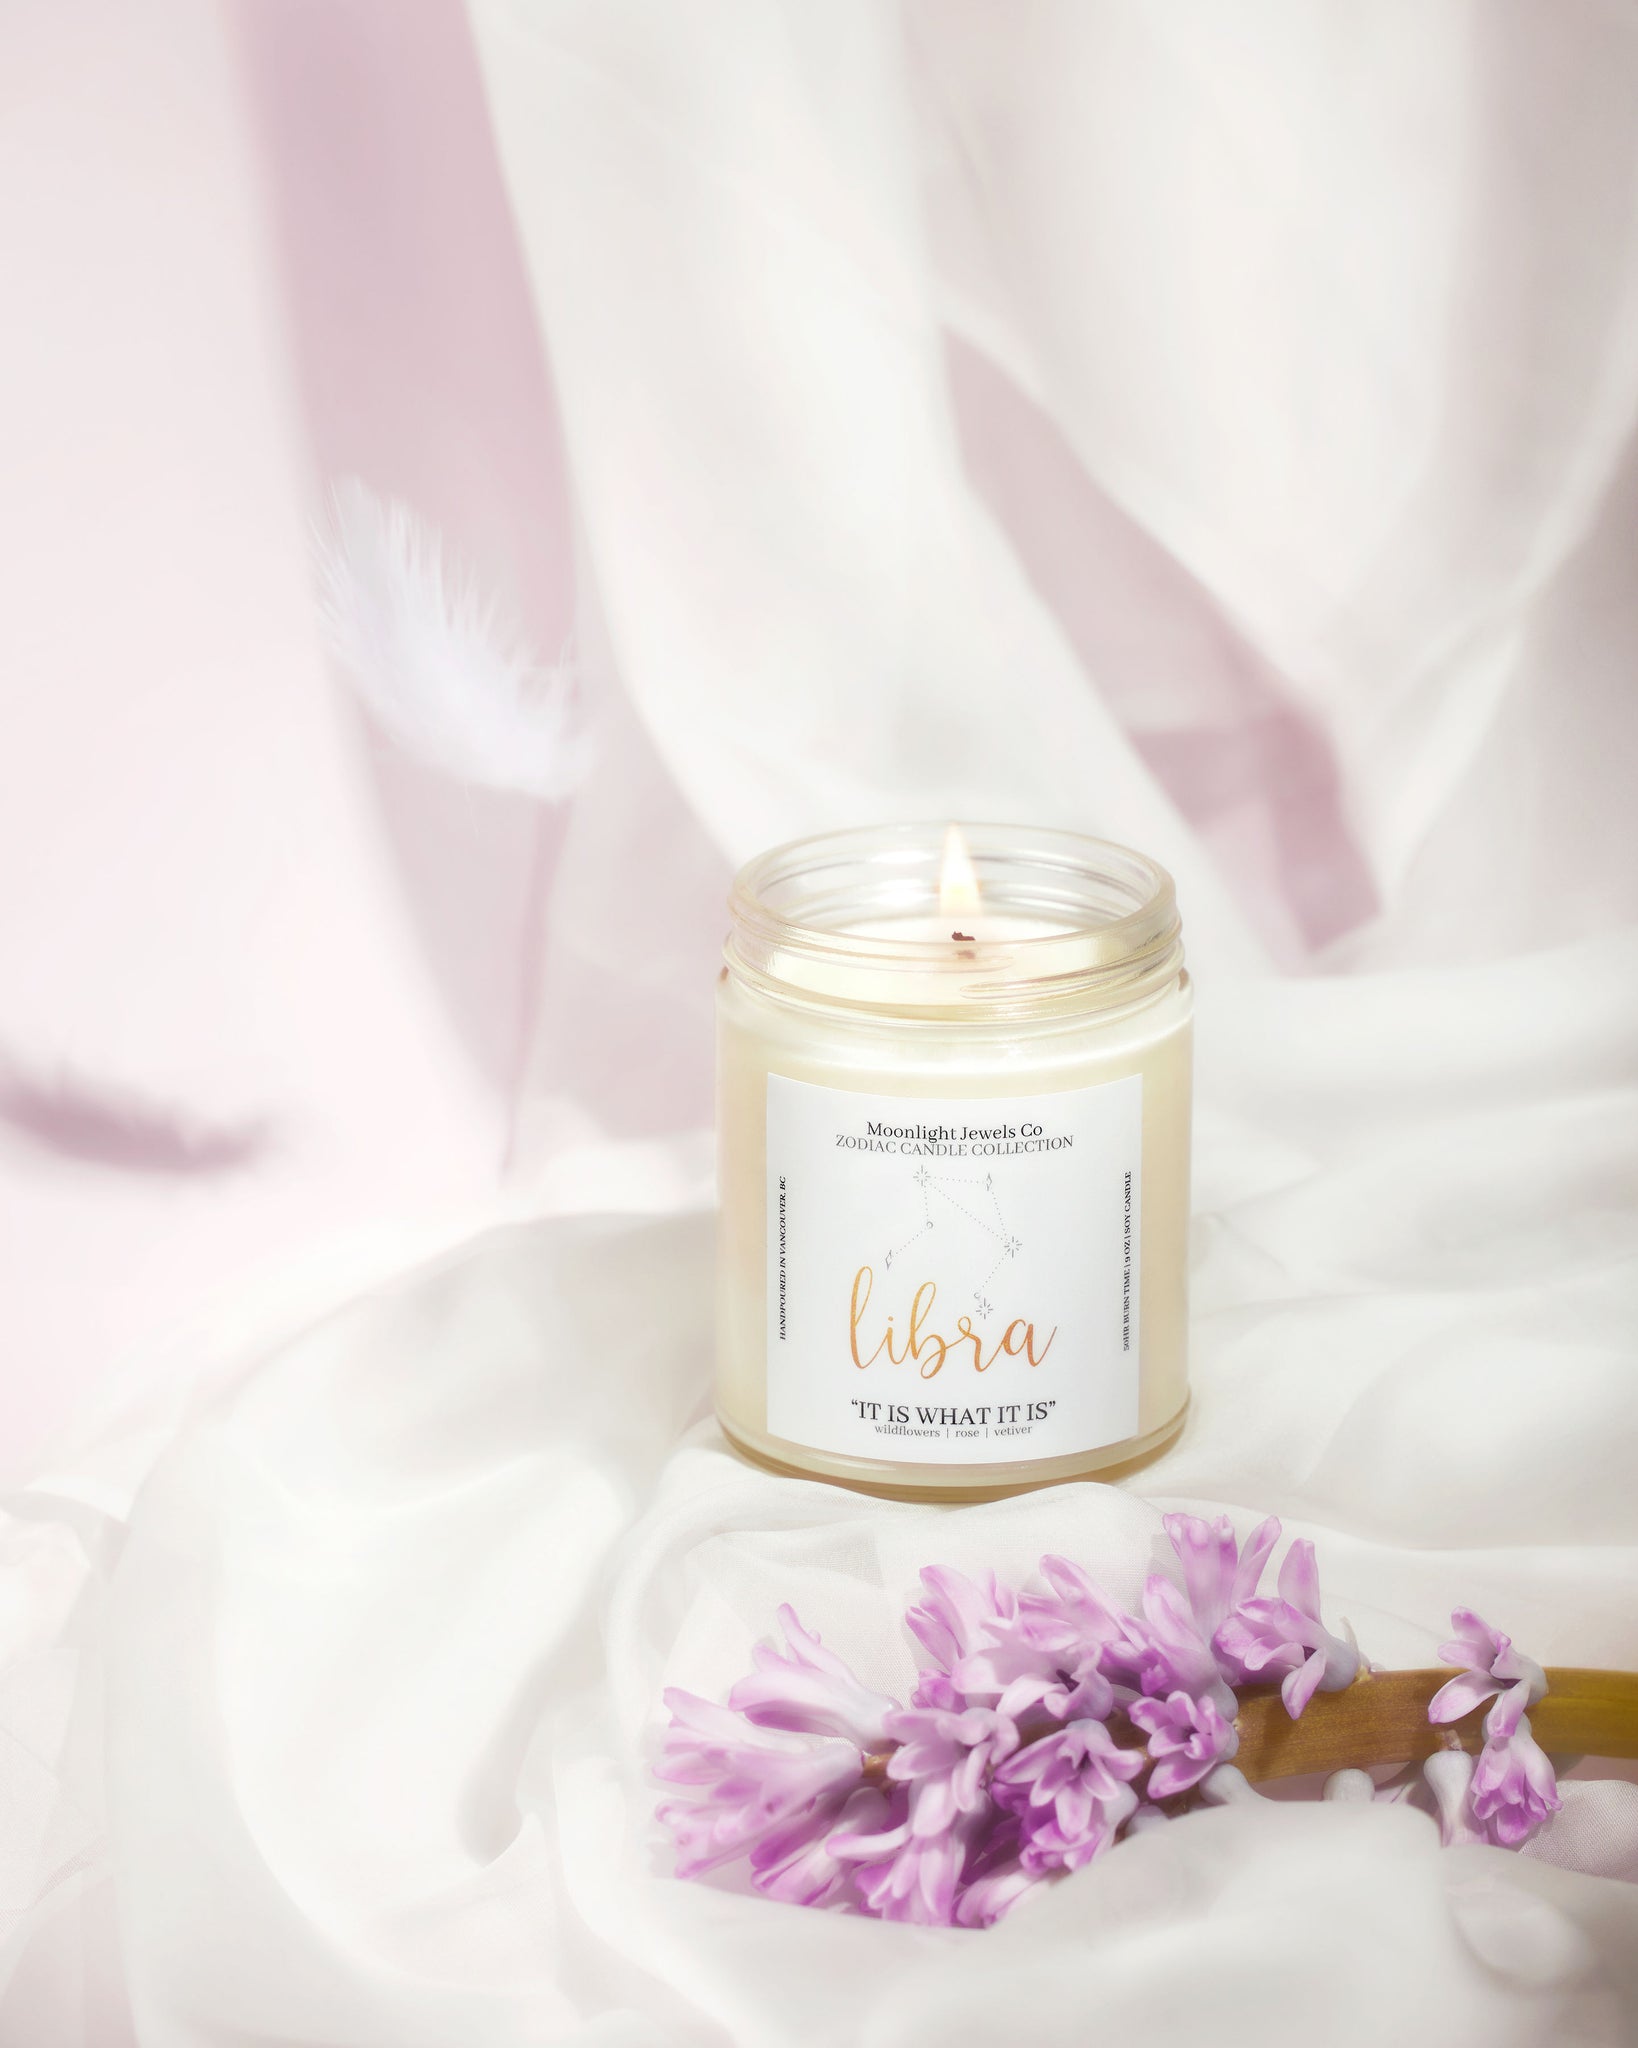 Libra "It Is What It Is" Zodiac Candle